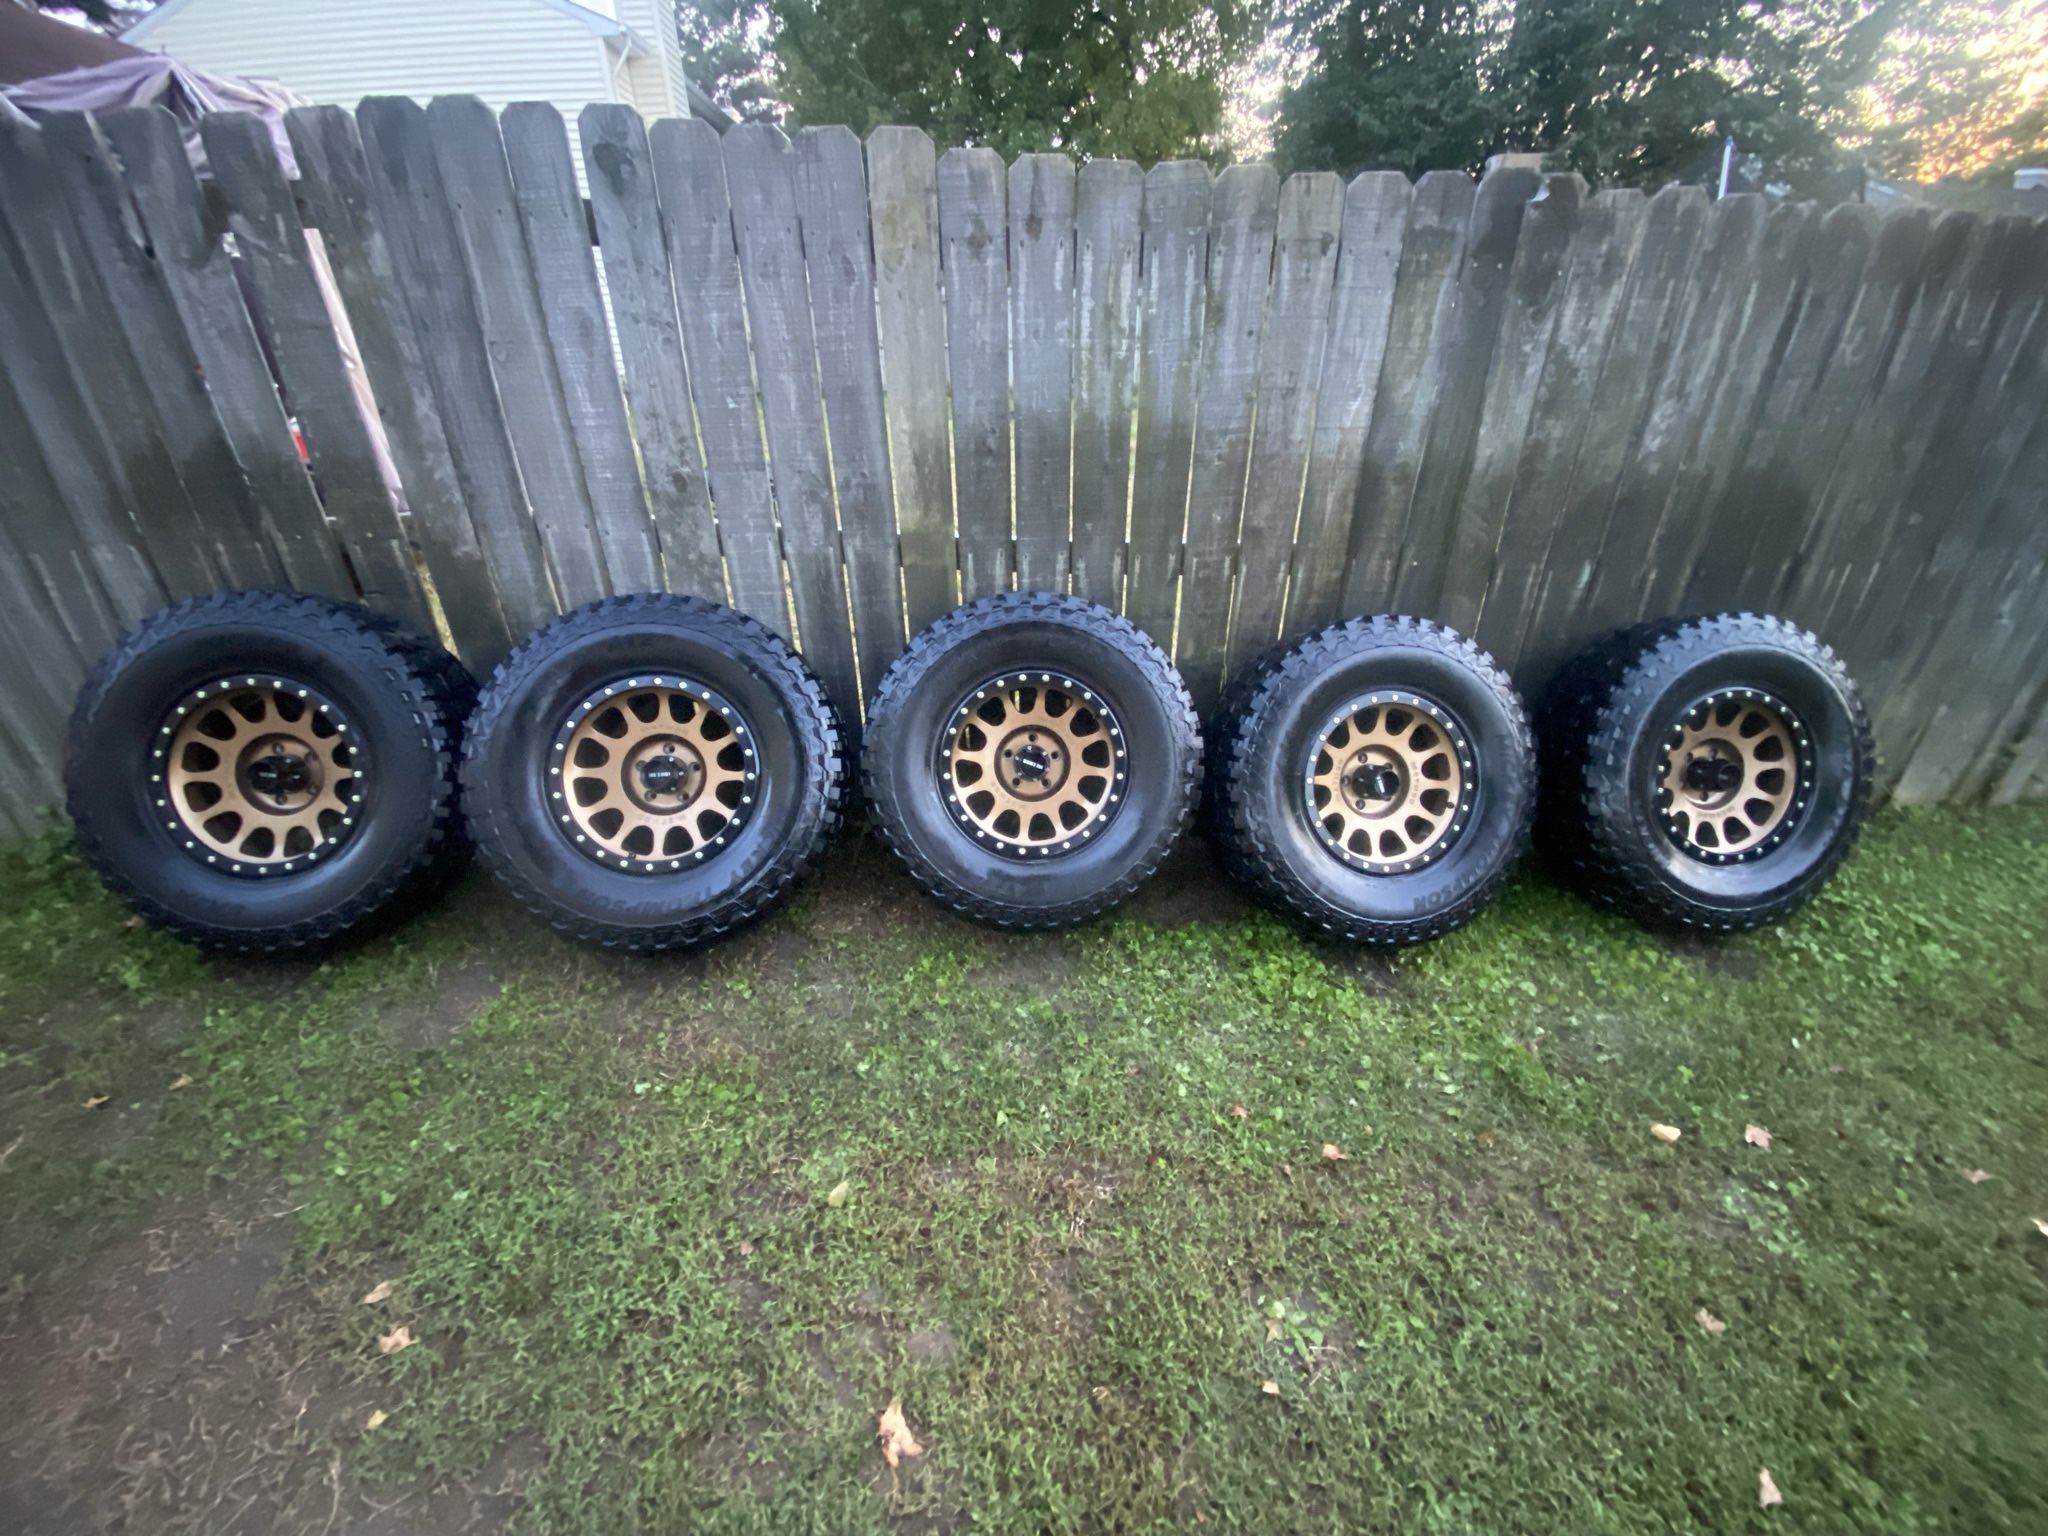 17” Method wheels with 35 inch Mickey Thompson tires